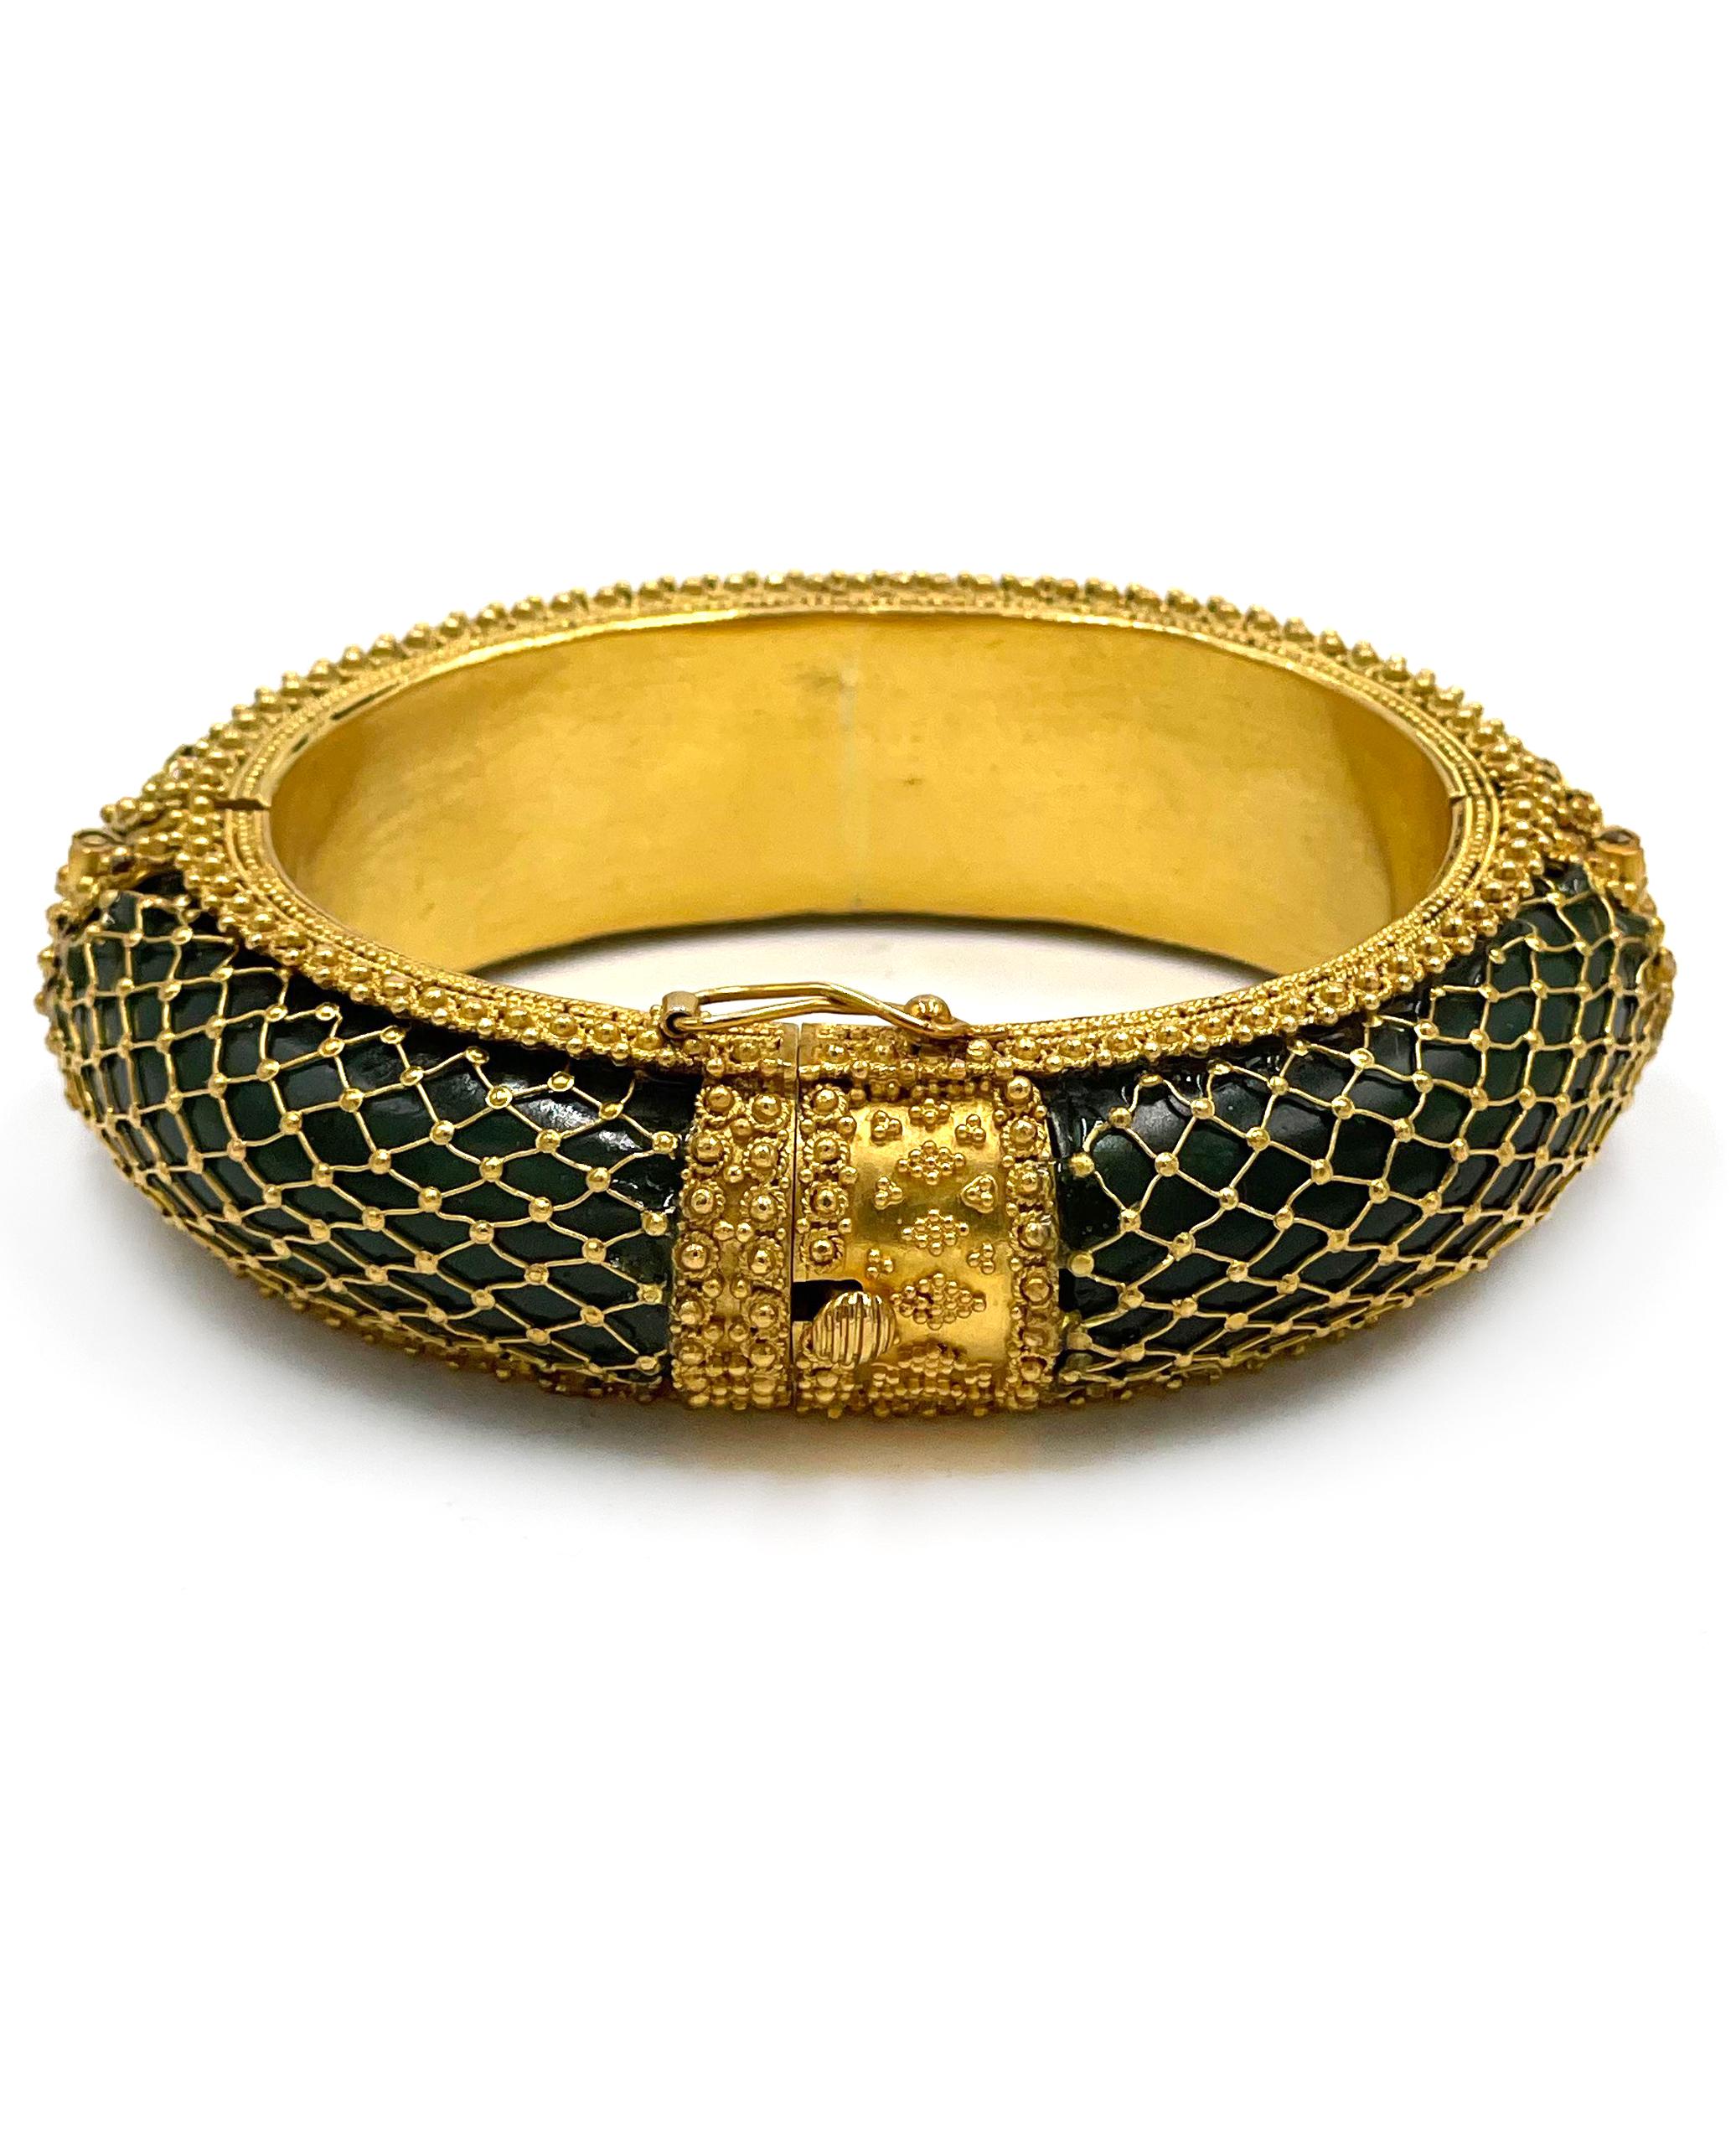 Pre owned vintage estate 18K yellow gold nephrite jade hinged bangle bracelet by Ilias Lalaounis.  The jade is a curved half round oval in three sections.  The jade measures 19.3mm wide and 8.8mm high.  The three sections are fitted into a frame and